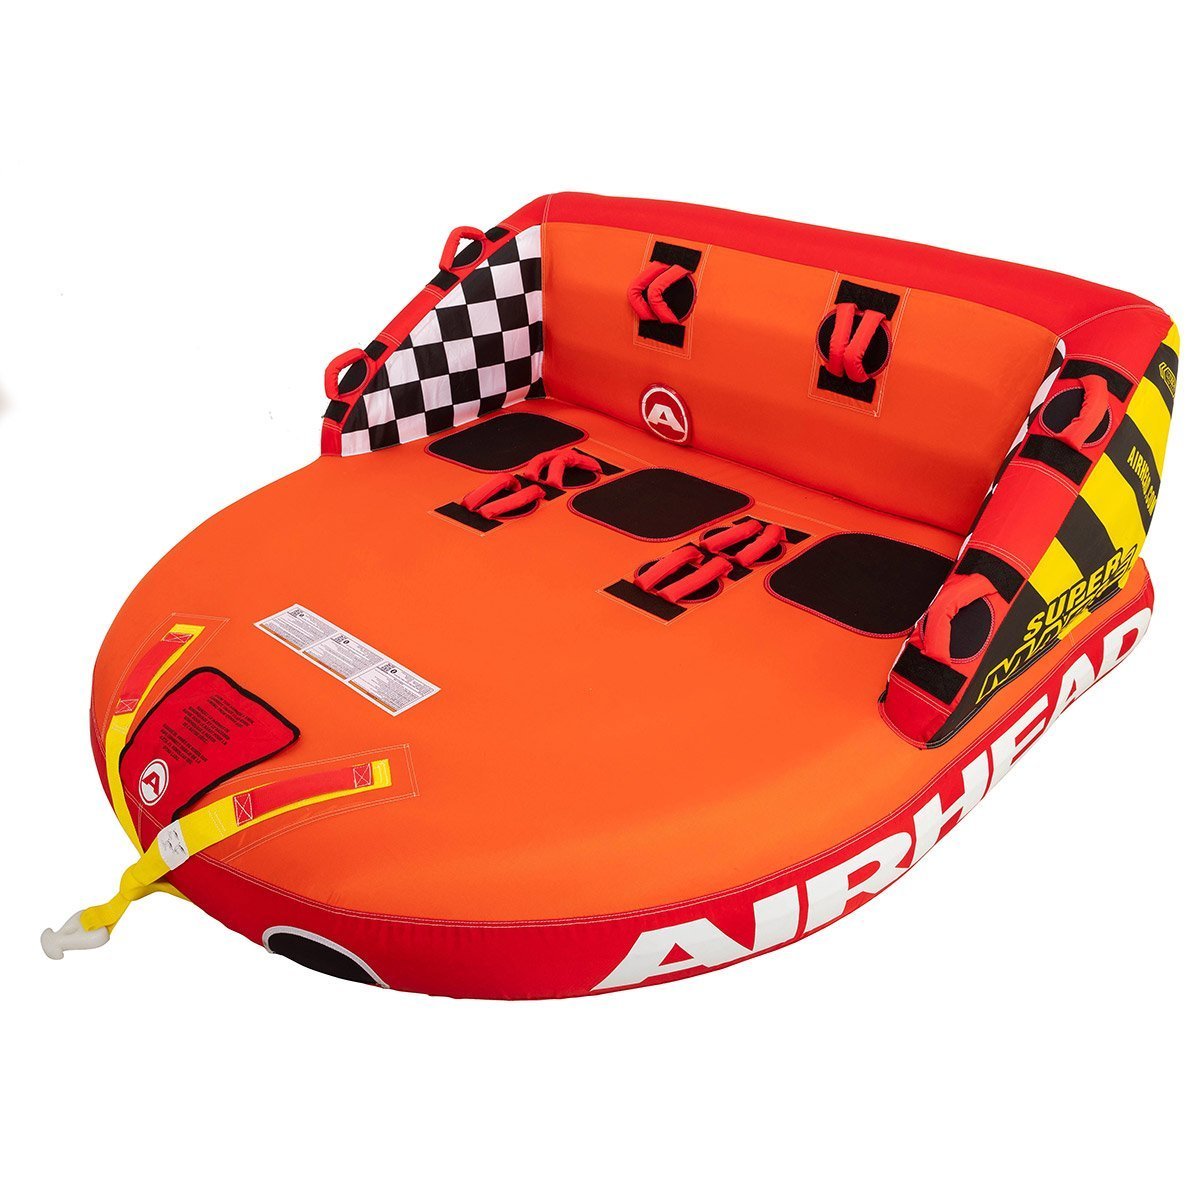 AIRHEAD SPORTSSTUFF SUPER MABLE 3 number of seats super marble towing tube / water toy / sport staff 